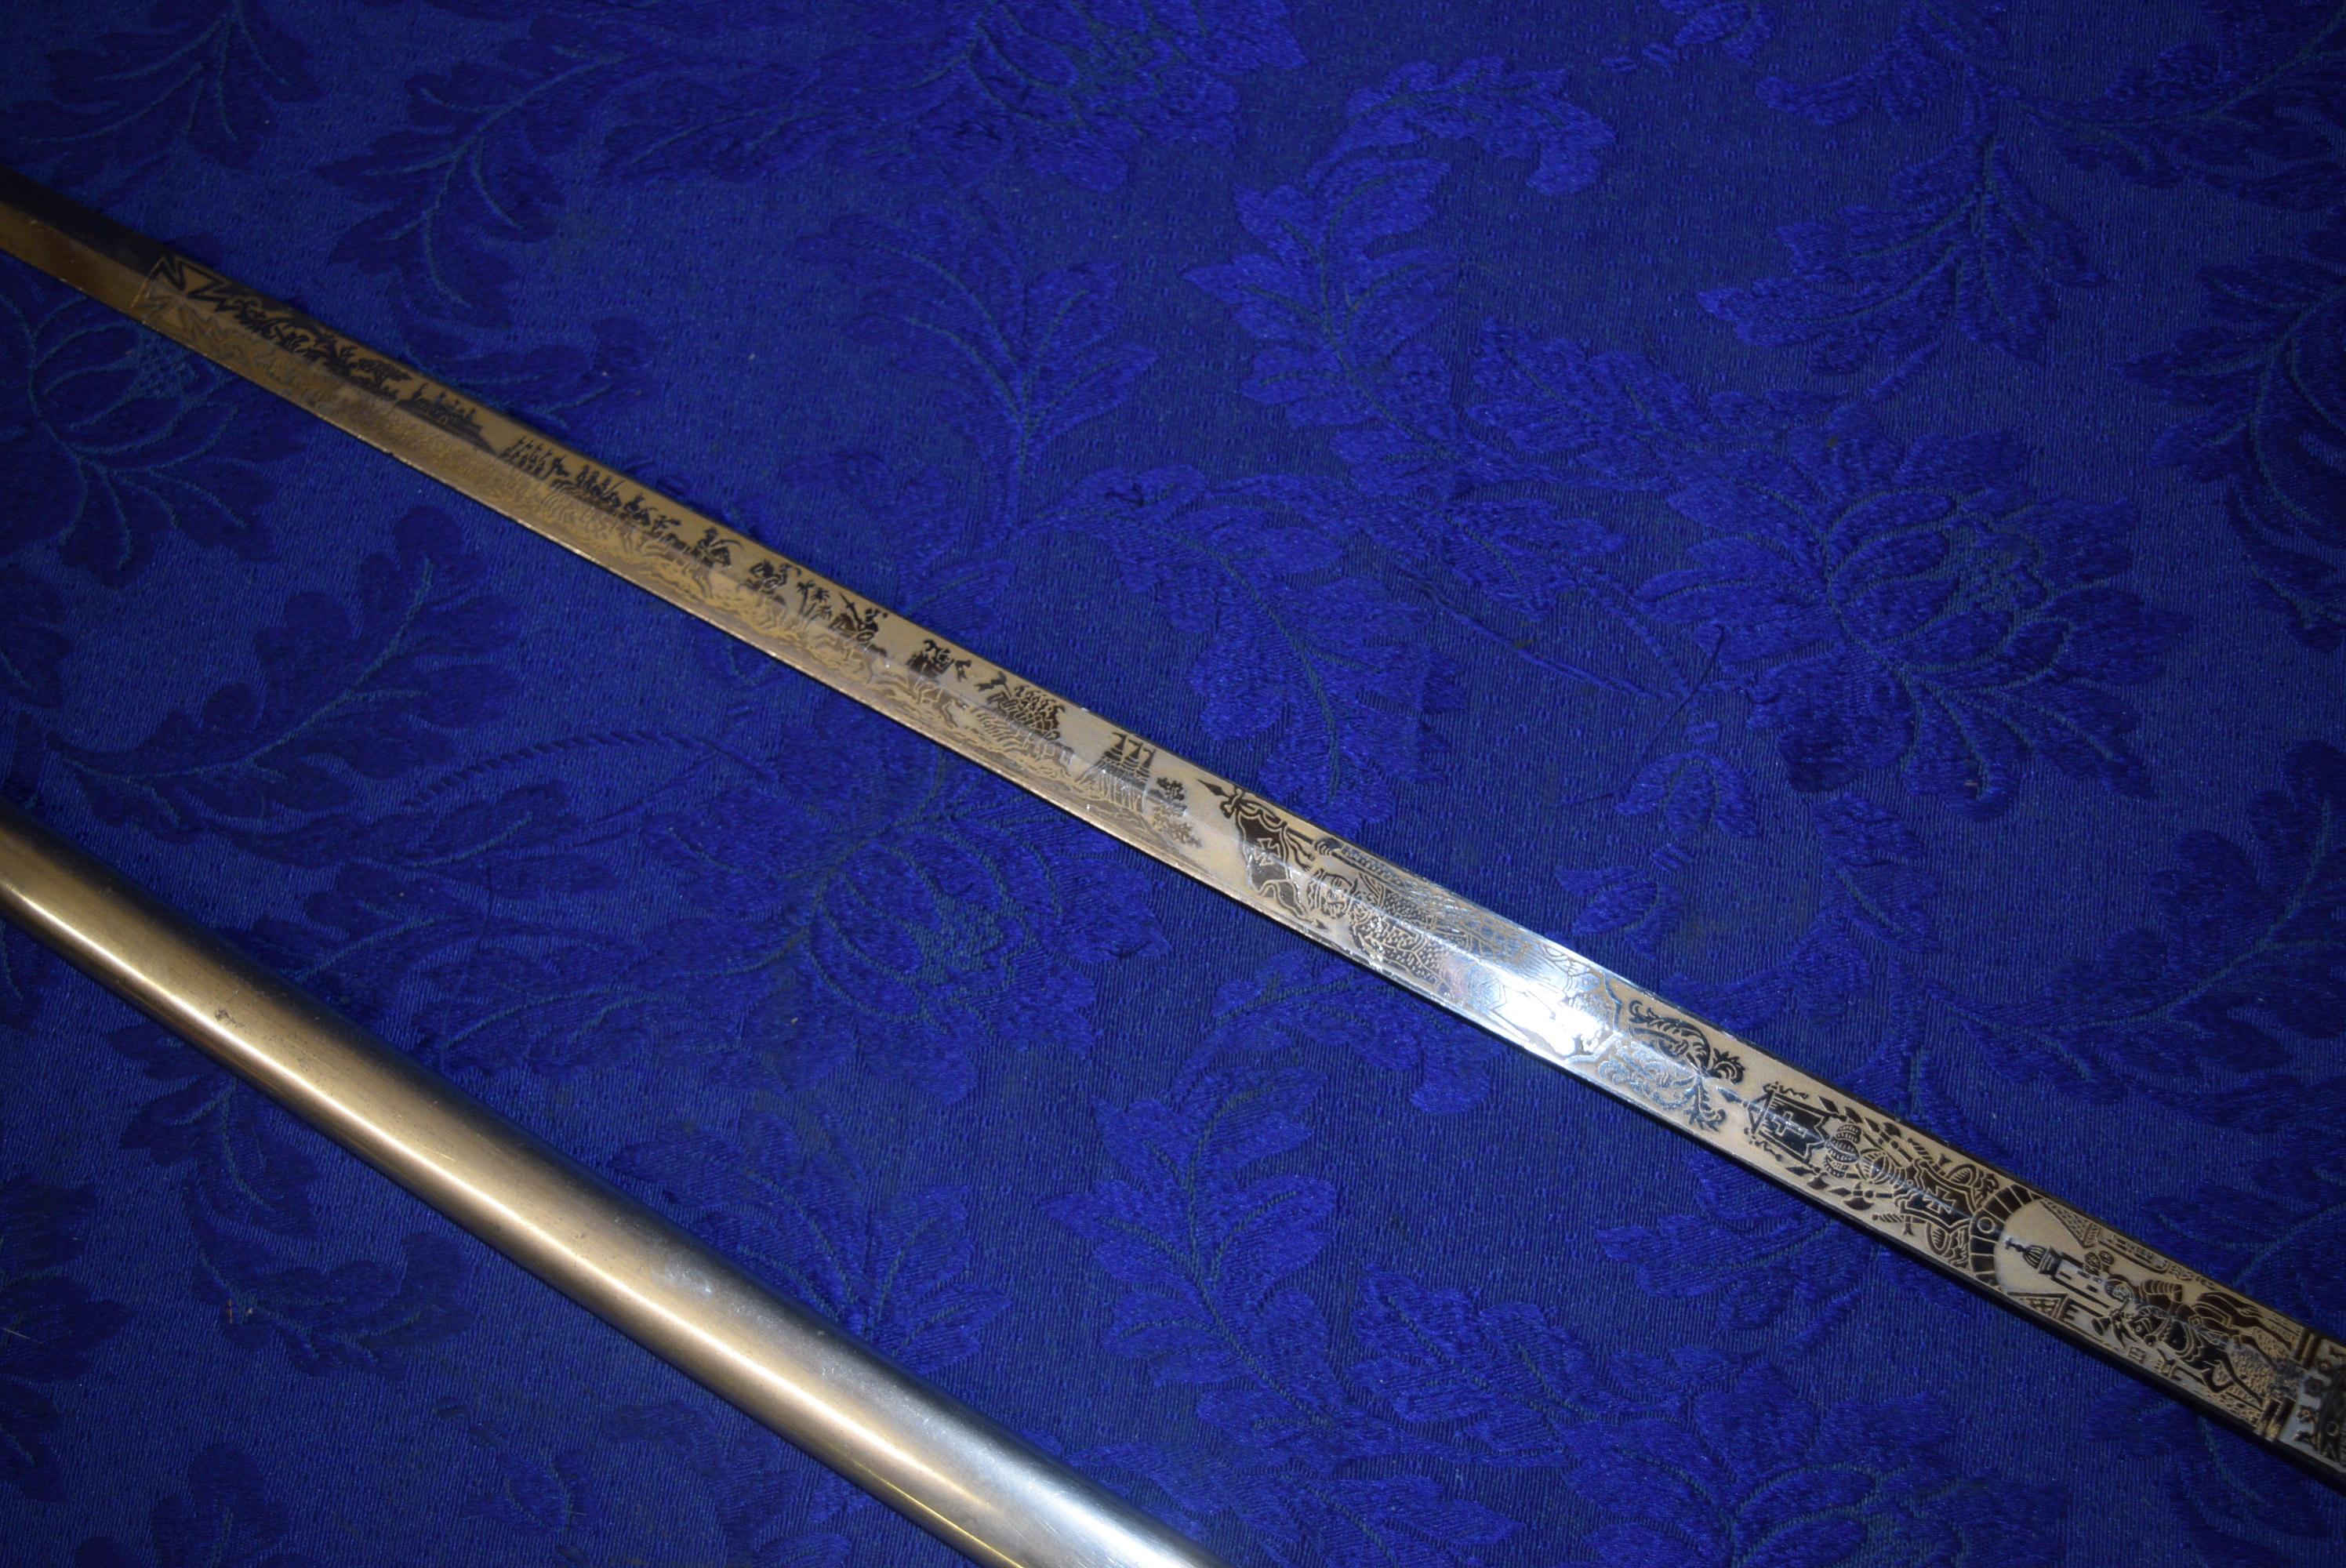 M C LILLEY & CO. NAMED KNIGHTS SWORD!